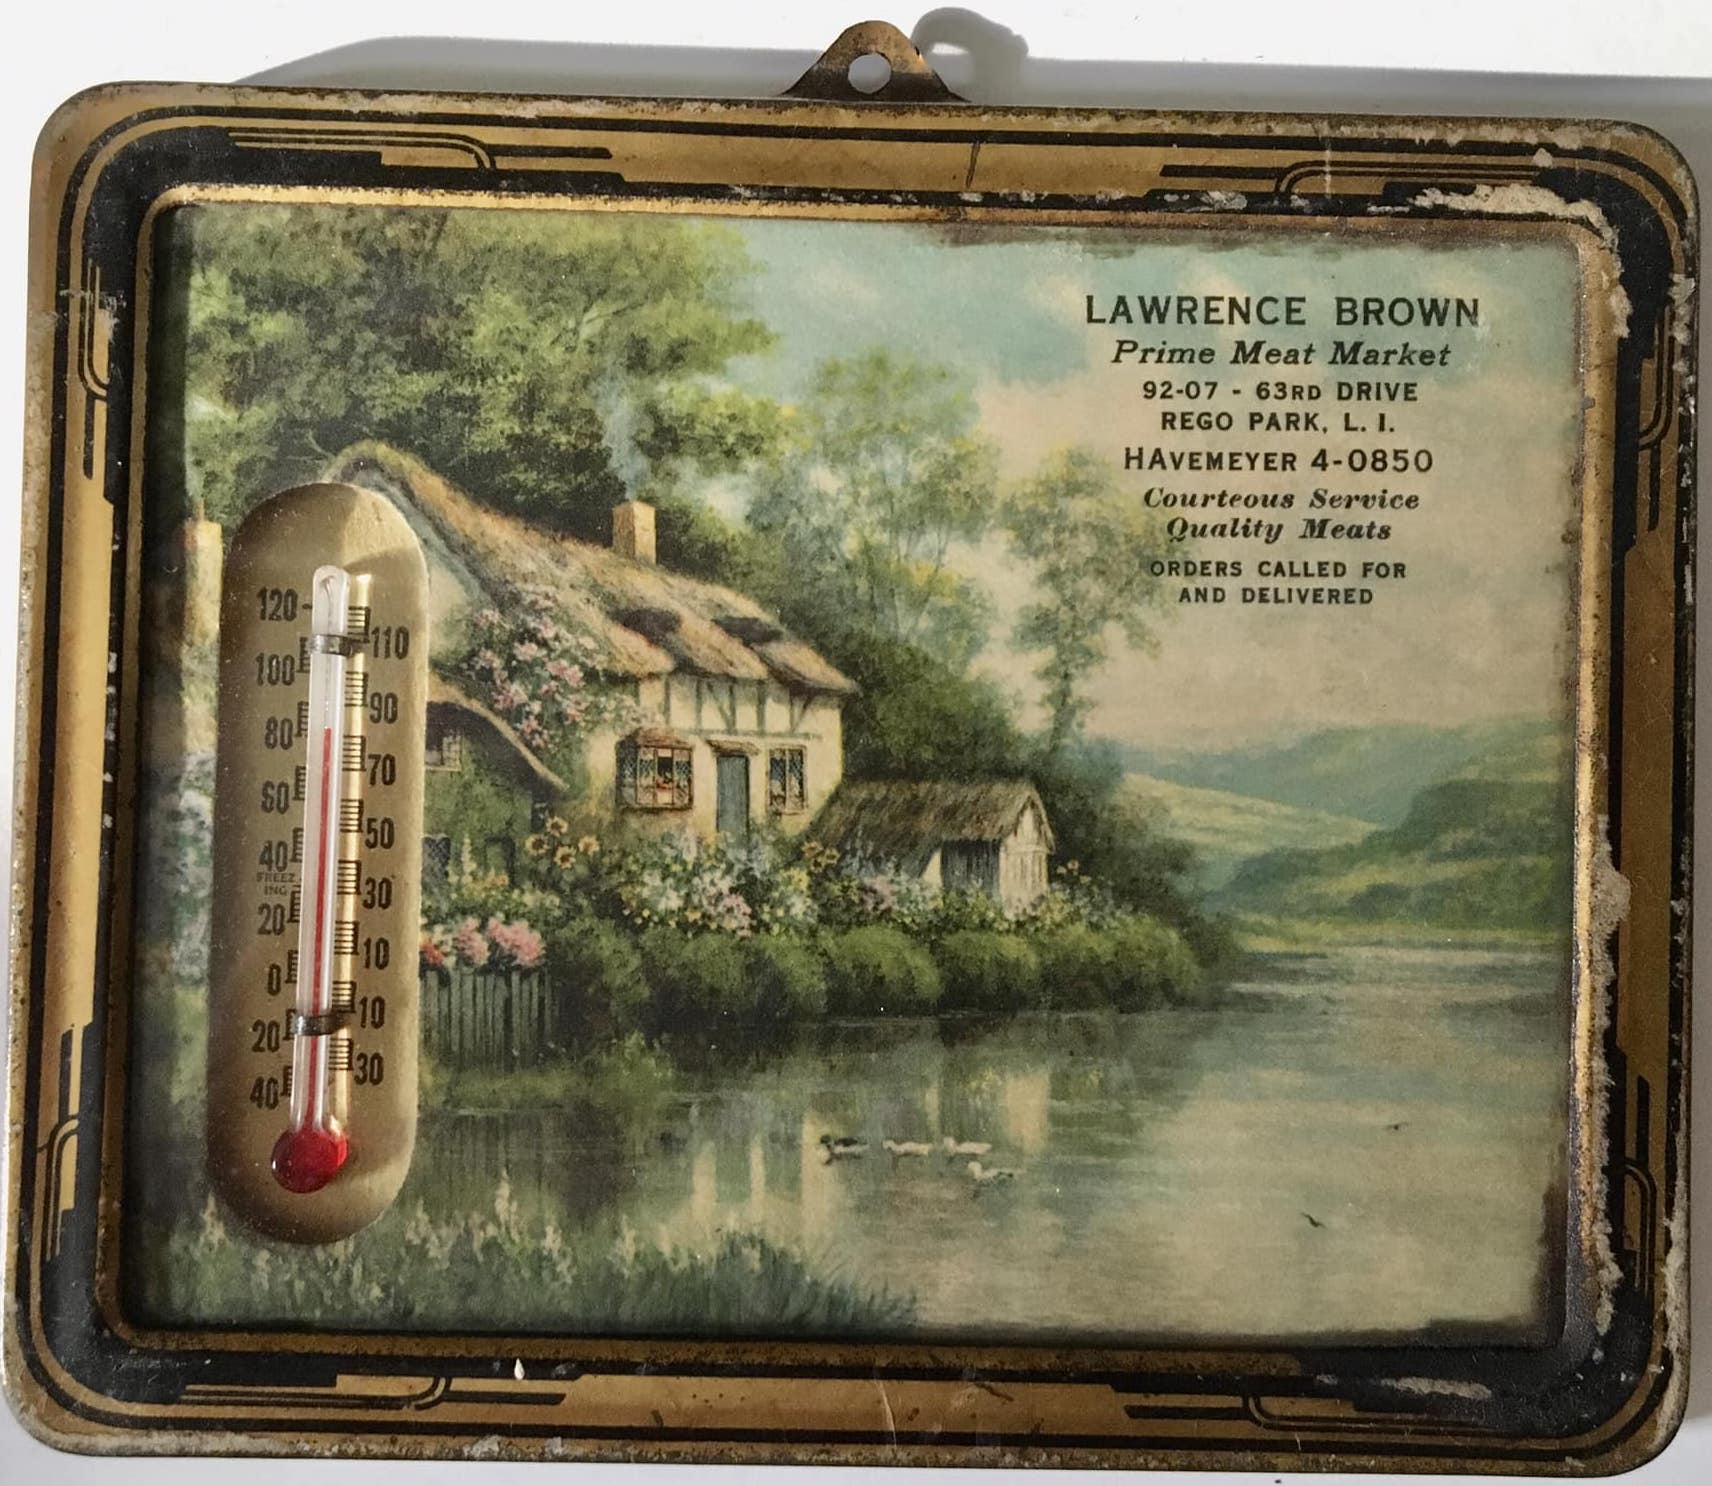 The forgotten art of advertising thermometers